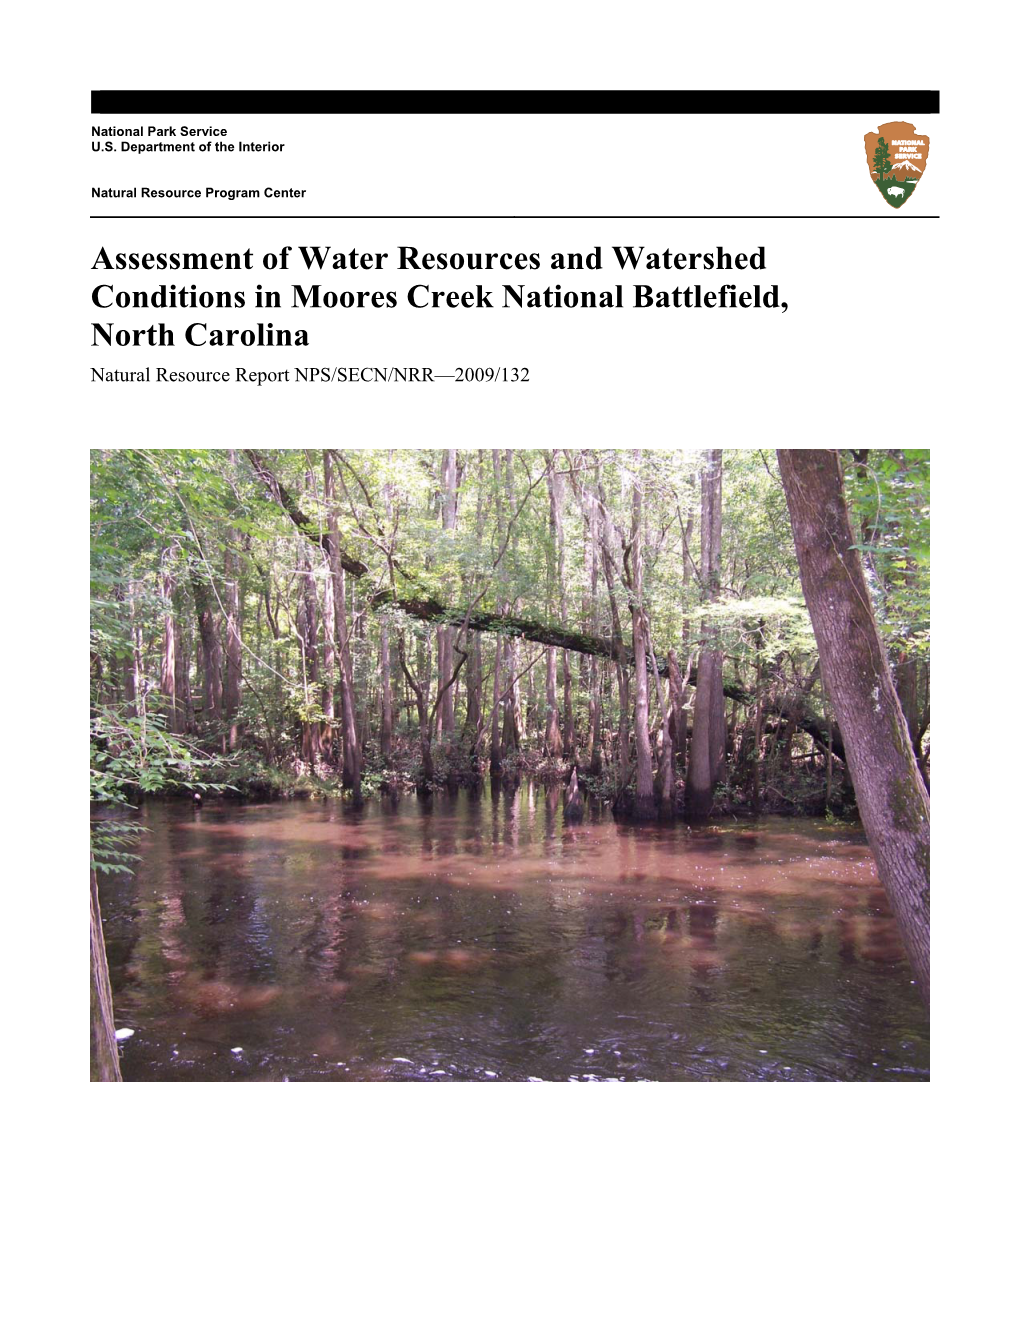 Assessment of Water Resources and Watershed Conditions in Moores Creek National Battlefield, North Carolina Natural Resource Report NPS/SECN/NRR—2009/132